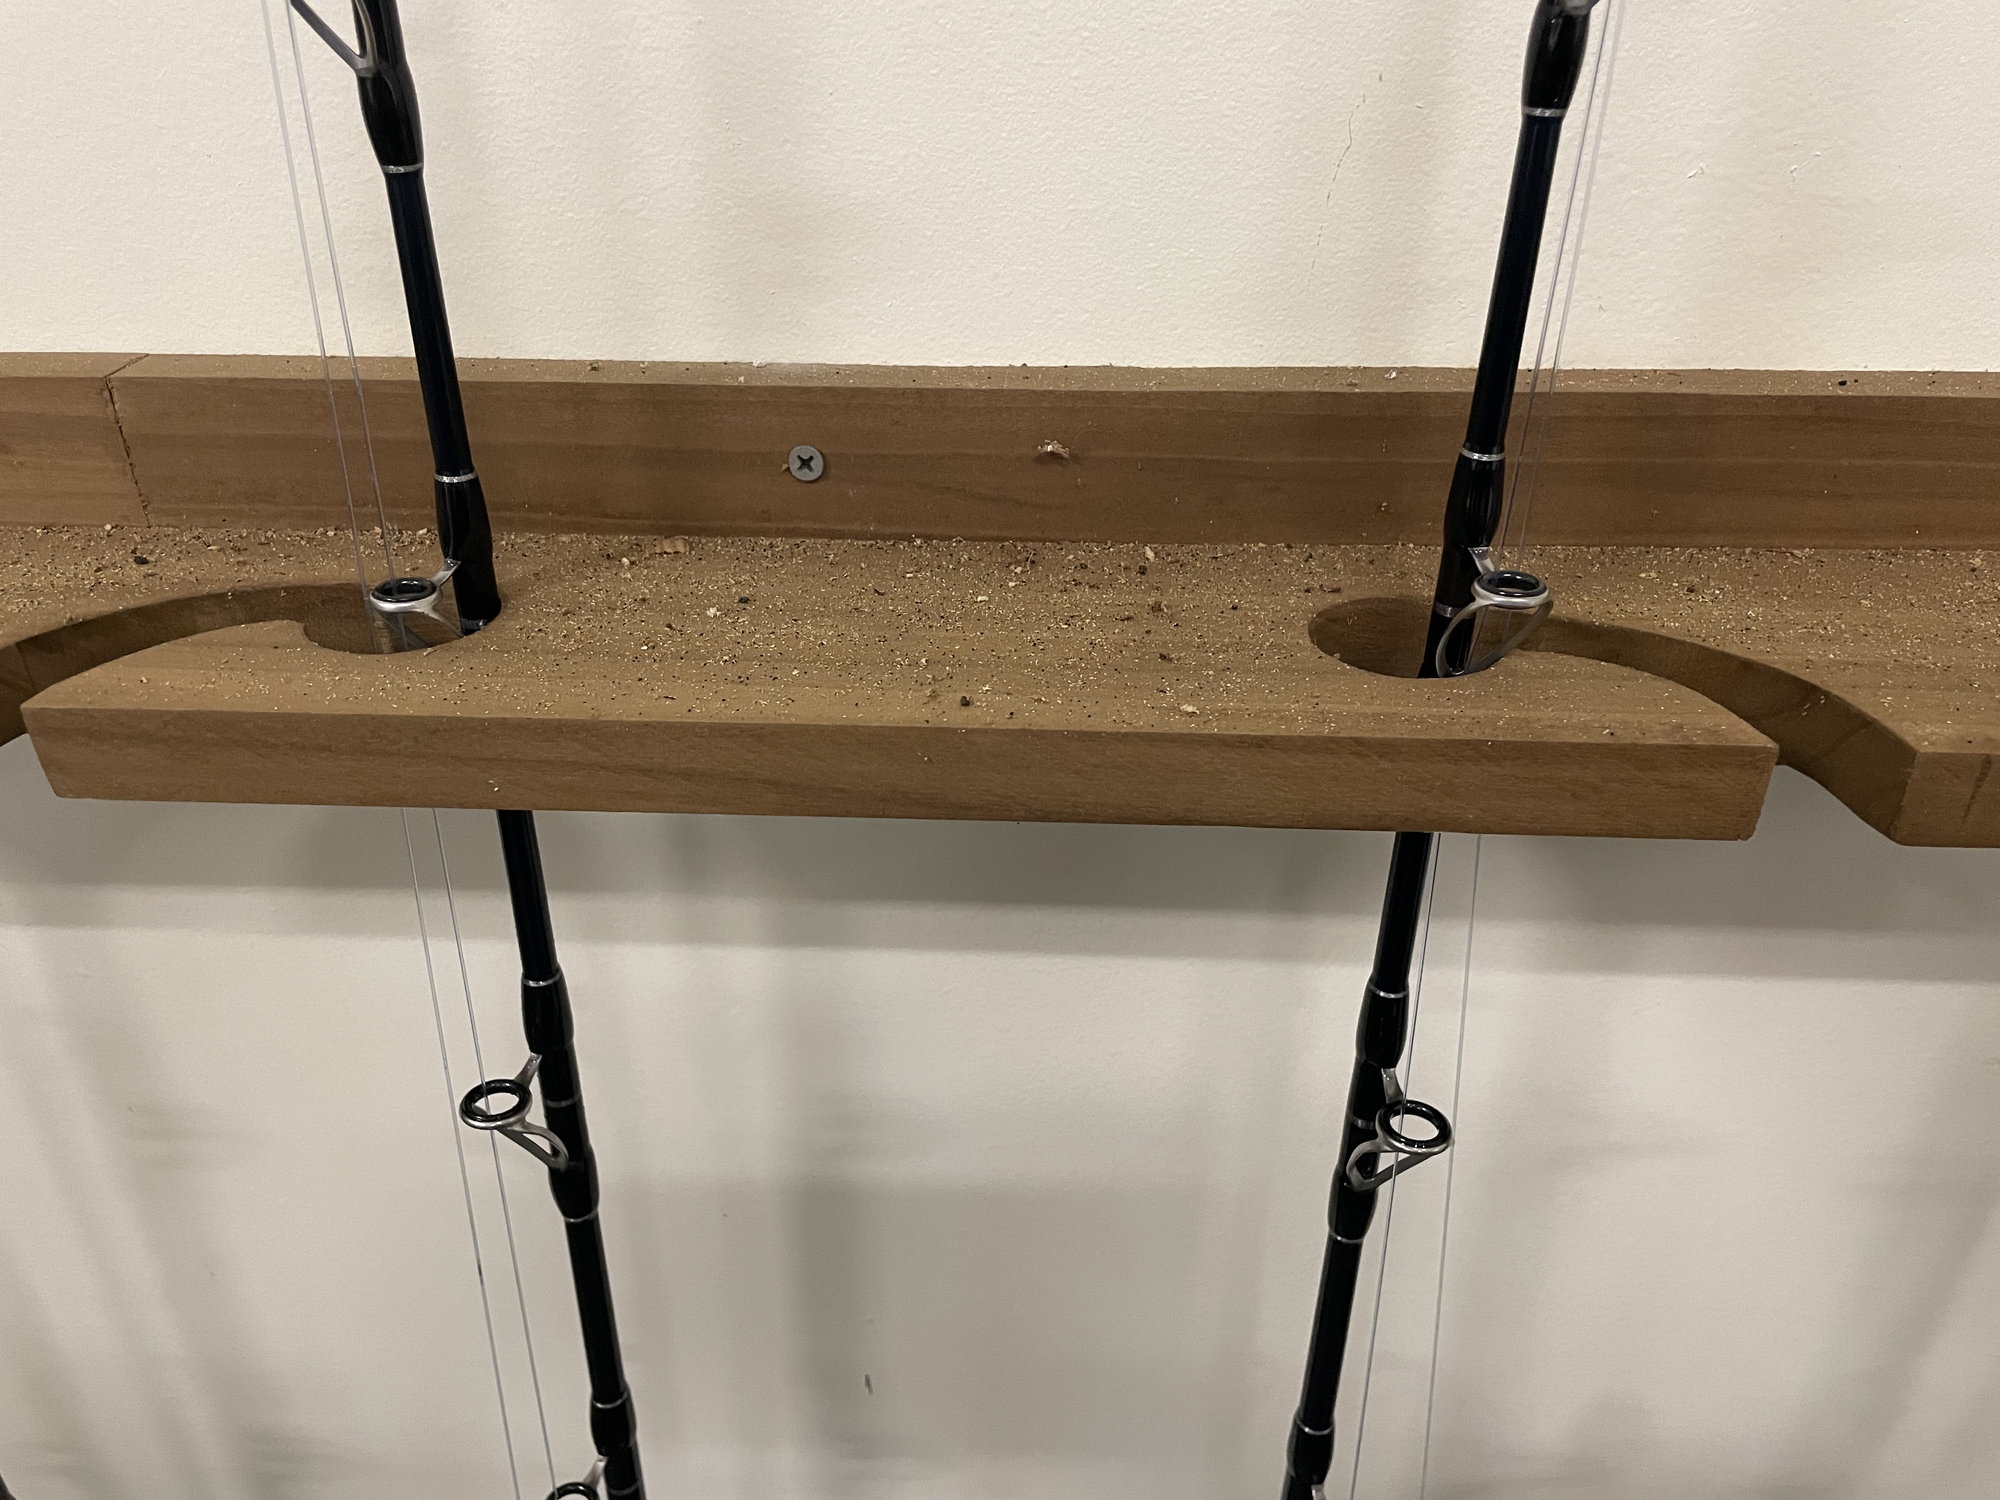 Fishing rod rack - hitch mounted cargo basket - The Hull Truth - Boating  and Fishing Forum